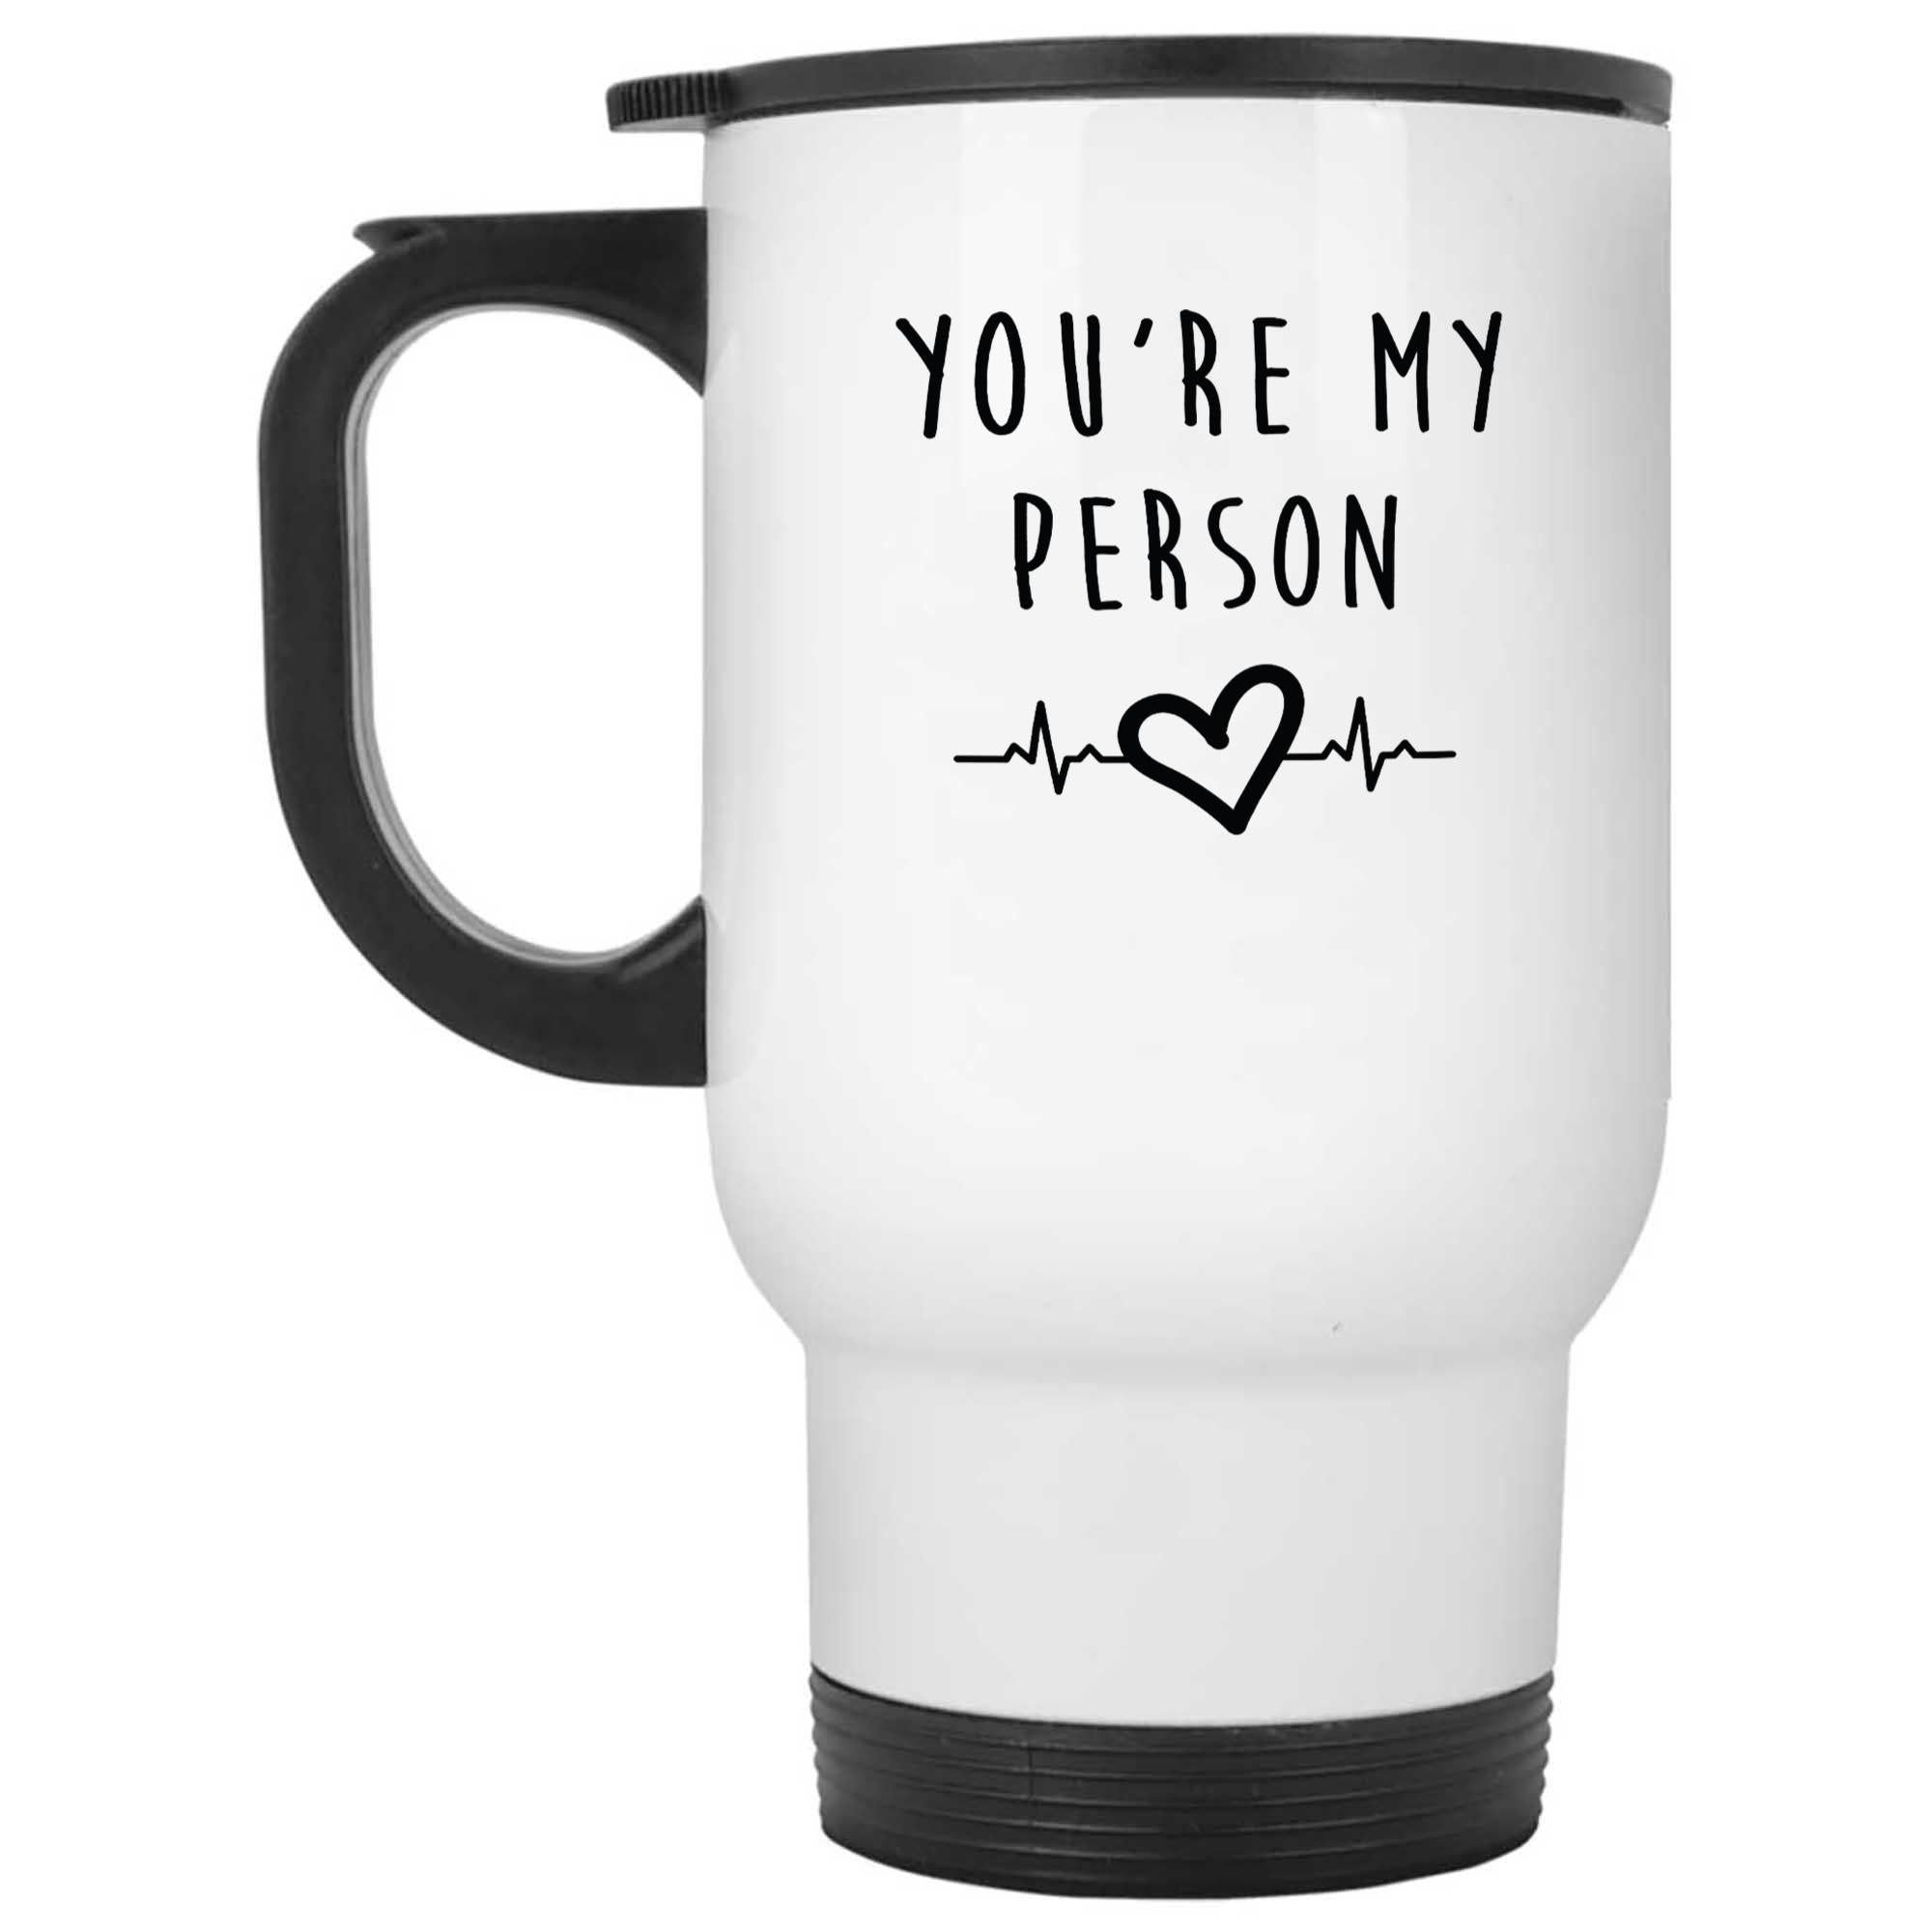 Skitongifts Funny Ceramic Novelty Coffee Mug You're My Person Funny For Greys Anatomy Fans hSBxxvy